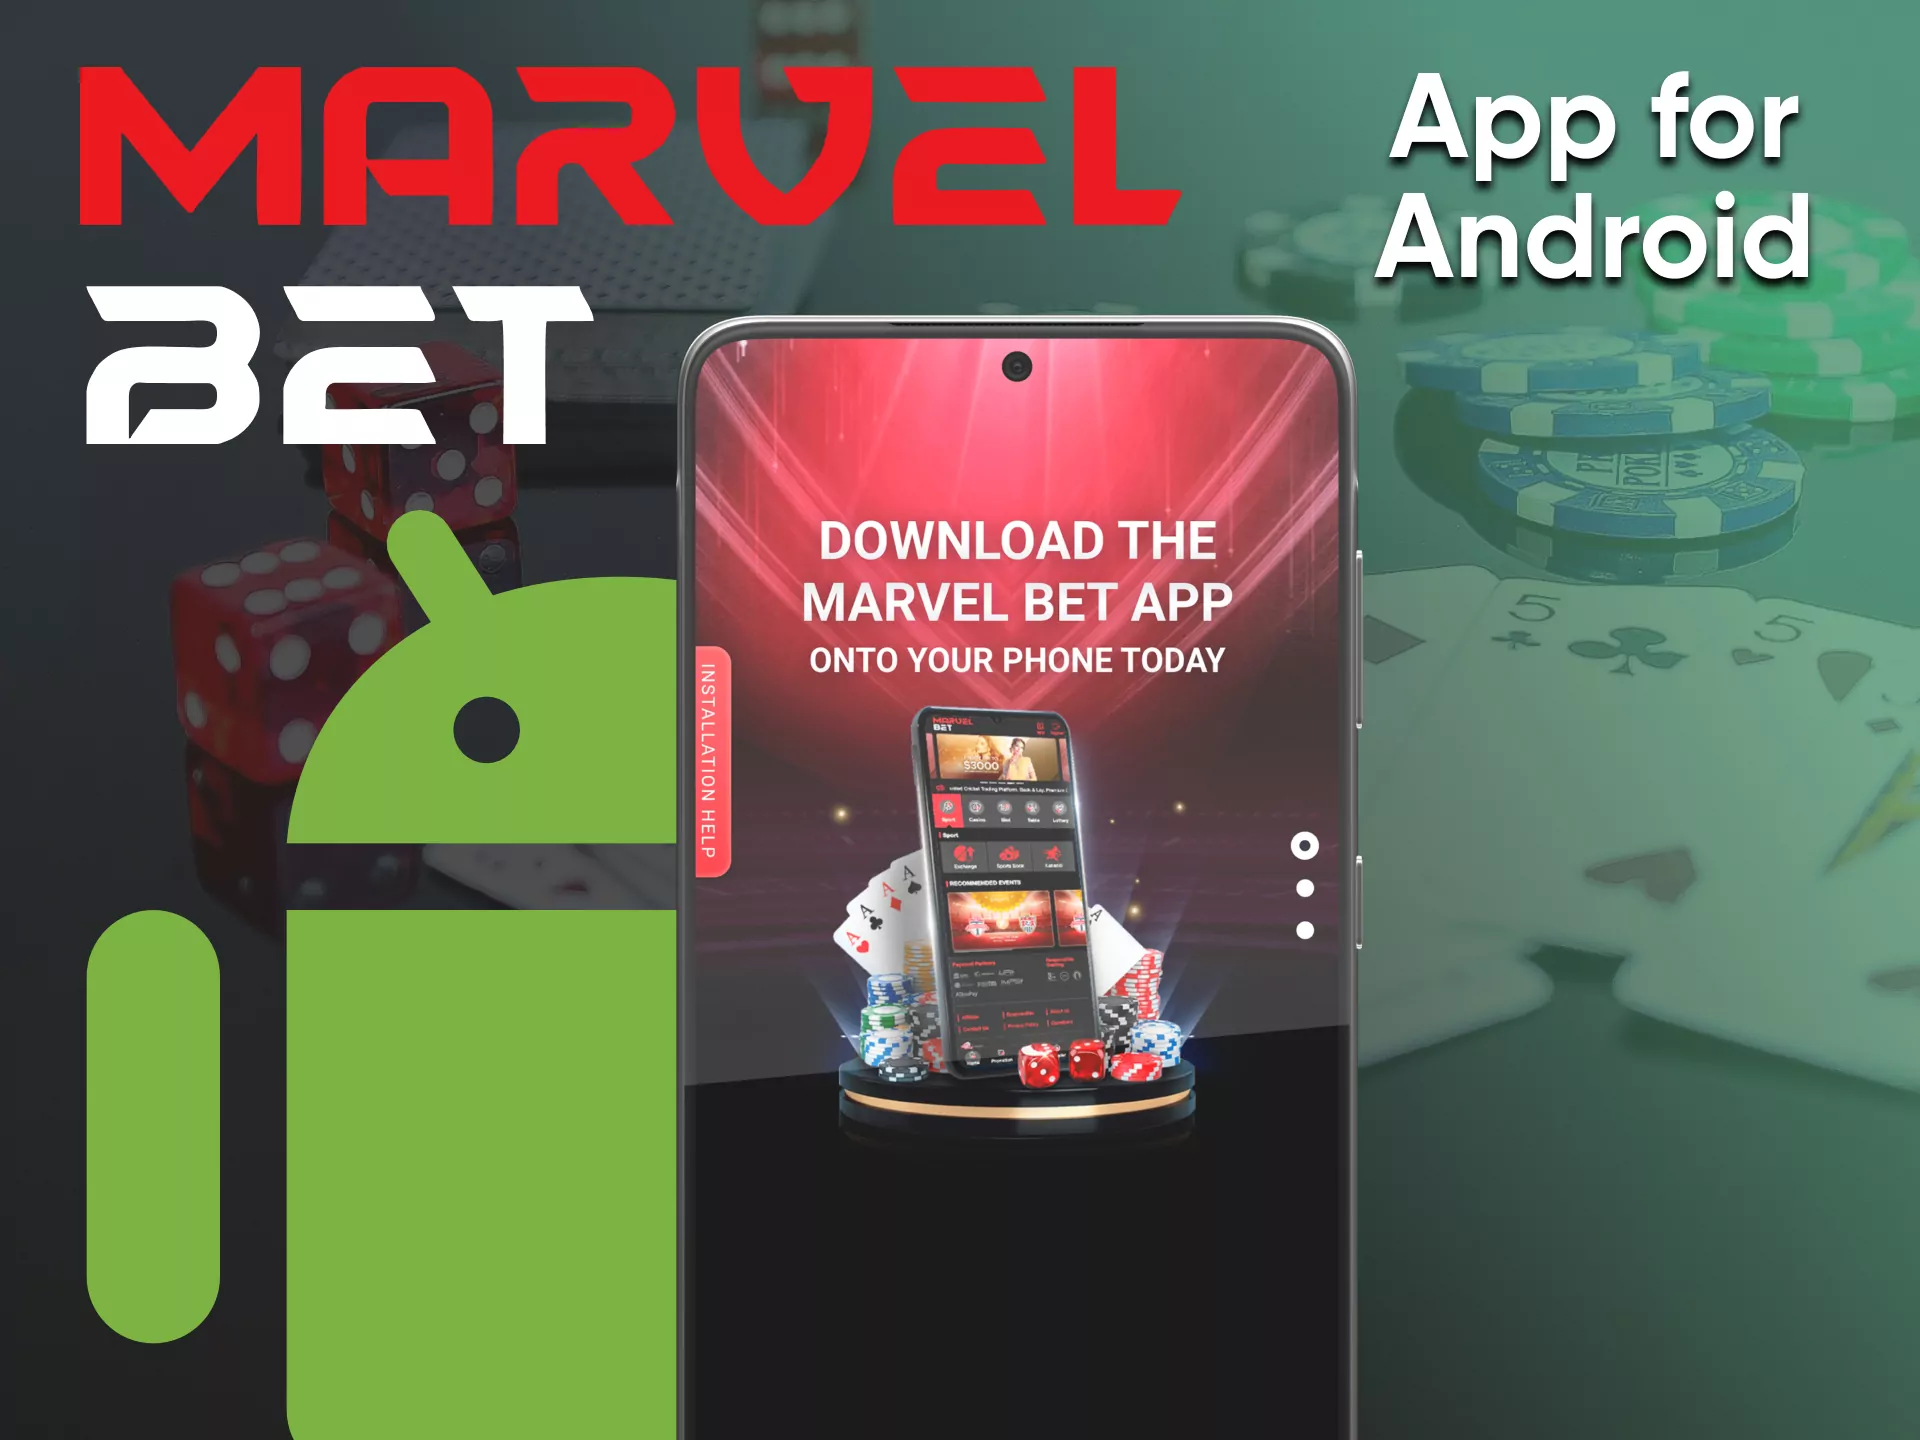 Install the application from Marvelbet on your smartphone.